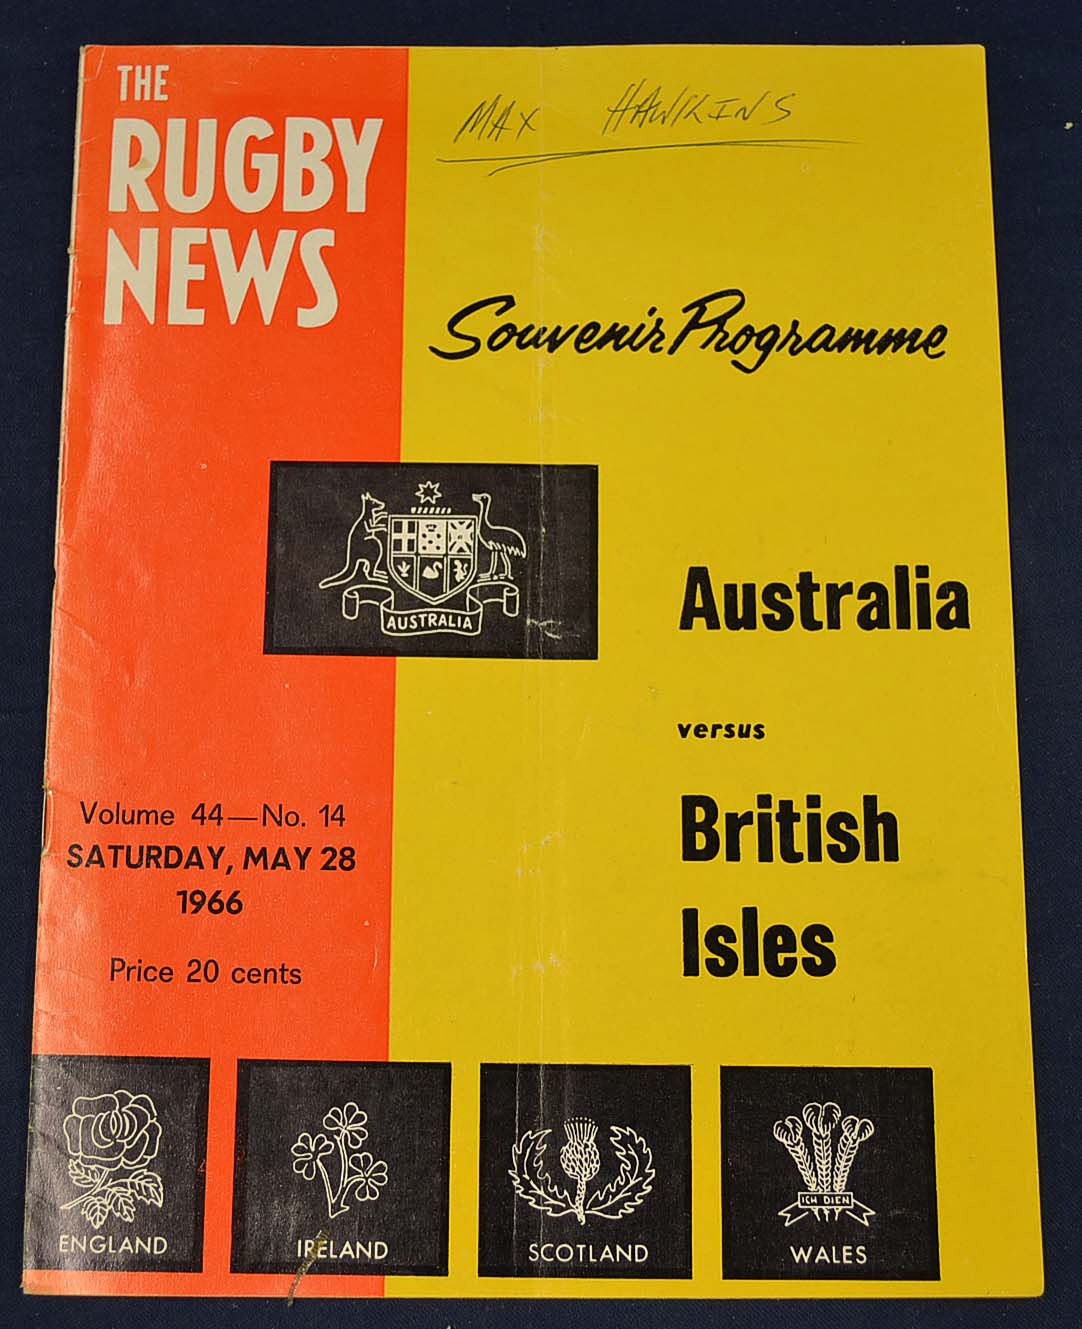 1966 British Lions v Australia rugby programme - played in Sydney on Saturday, May 28 with the Lions - Image 2 of 2